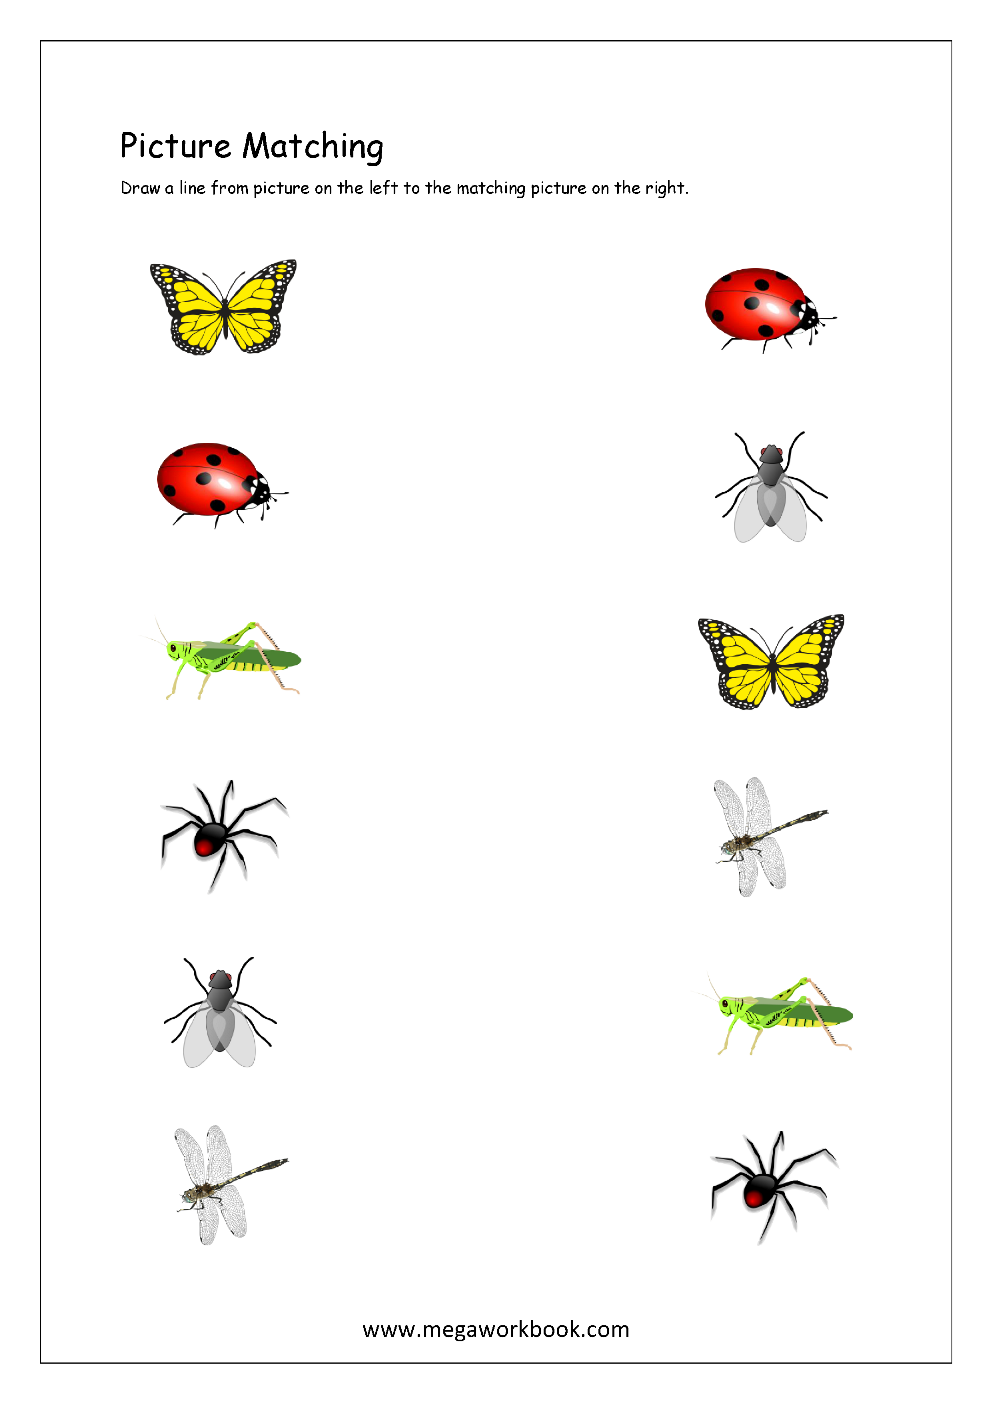 Picture Matching Worksheets For Preschool - Free Logical Thinking